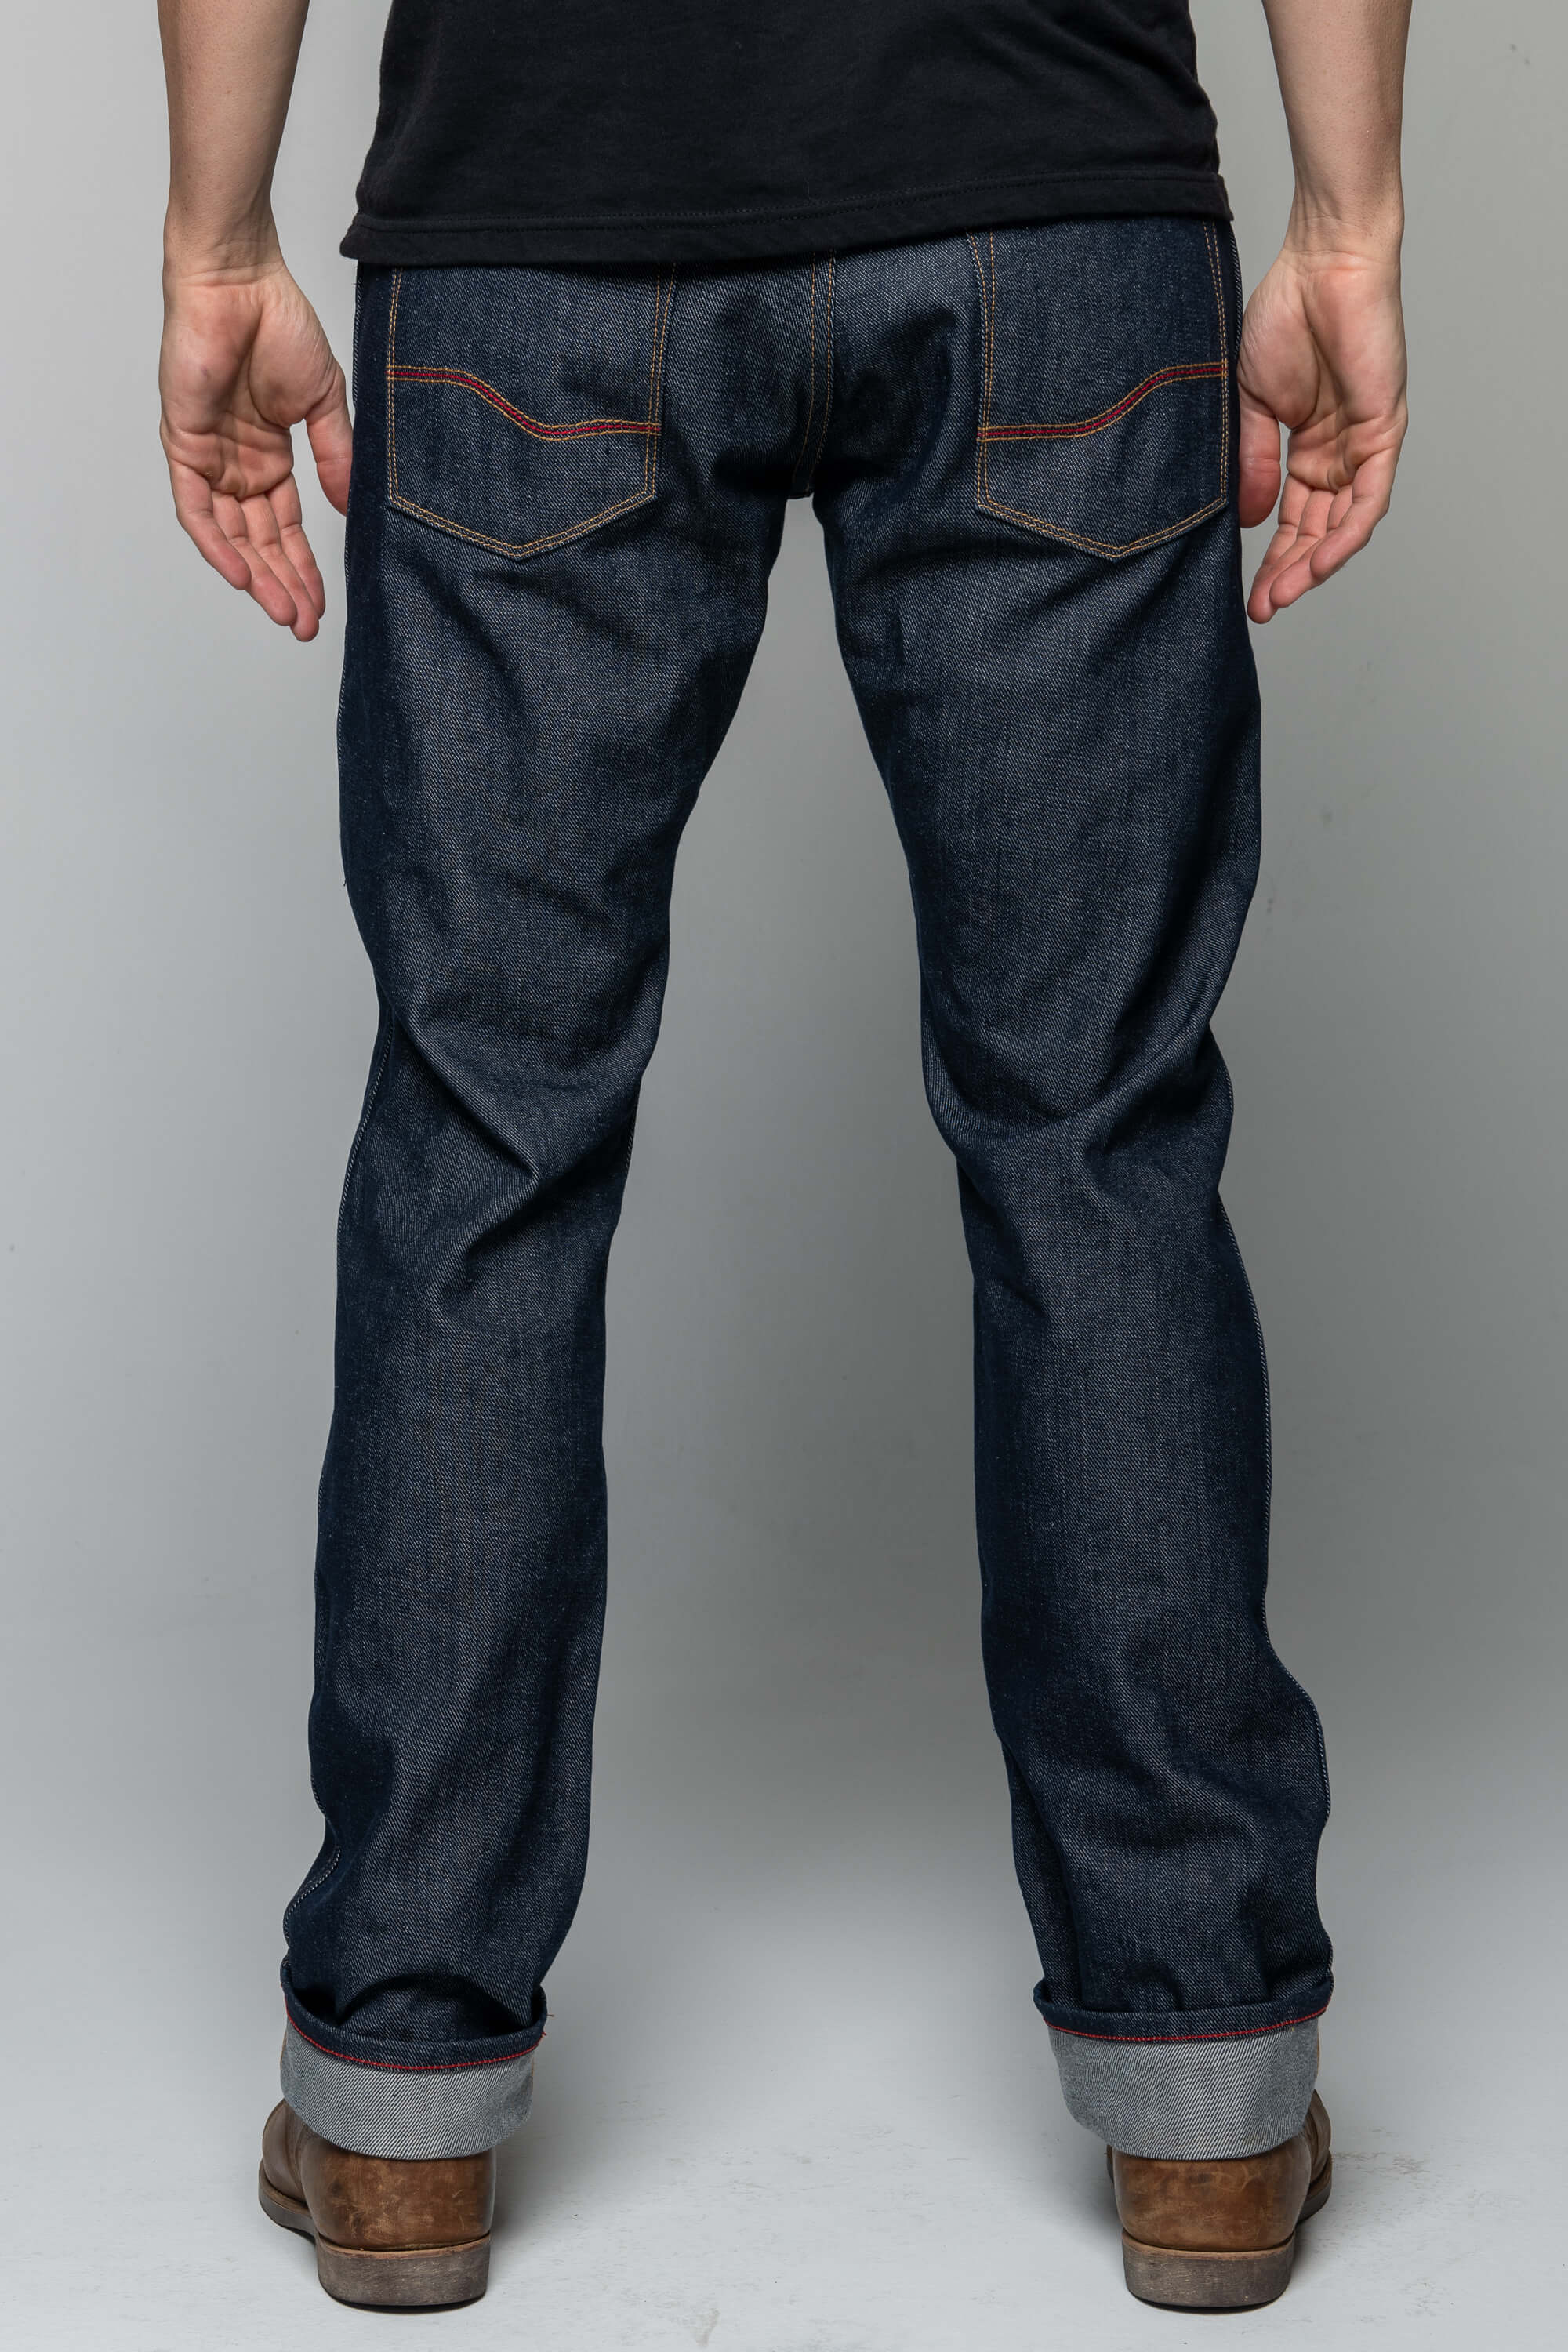 Caballo Relaxed Fit Indigo Protective Riding Jeans - Feat. Protective  DuPont™ Kevlar® Lining, Extra Durable Caballo Seams. 12.25 oz Ghirardelli  Pre-washed Stretch Denim - Tobacco Motorwear